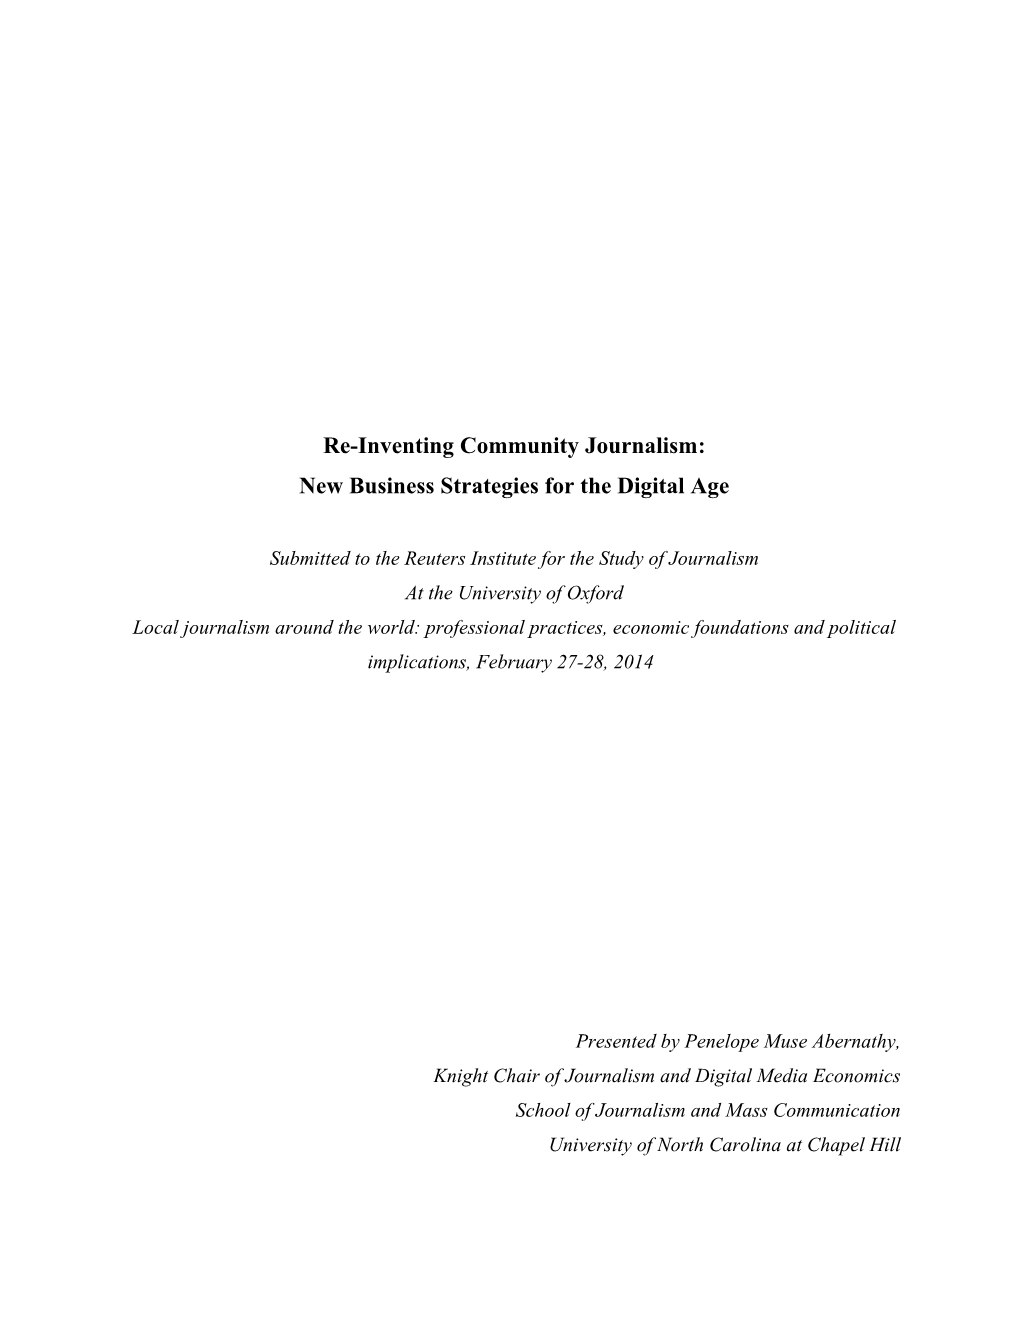 New Business Strategies for the Digital Age